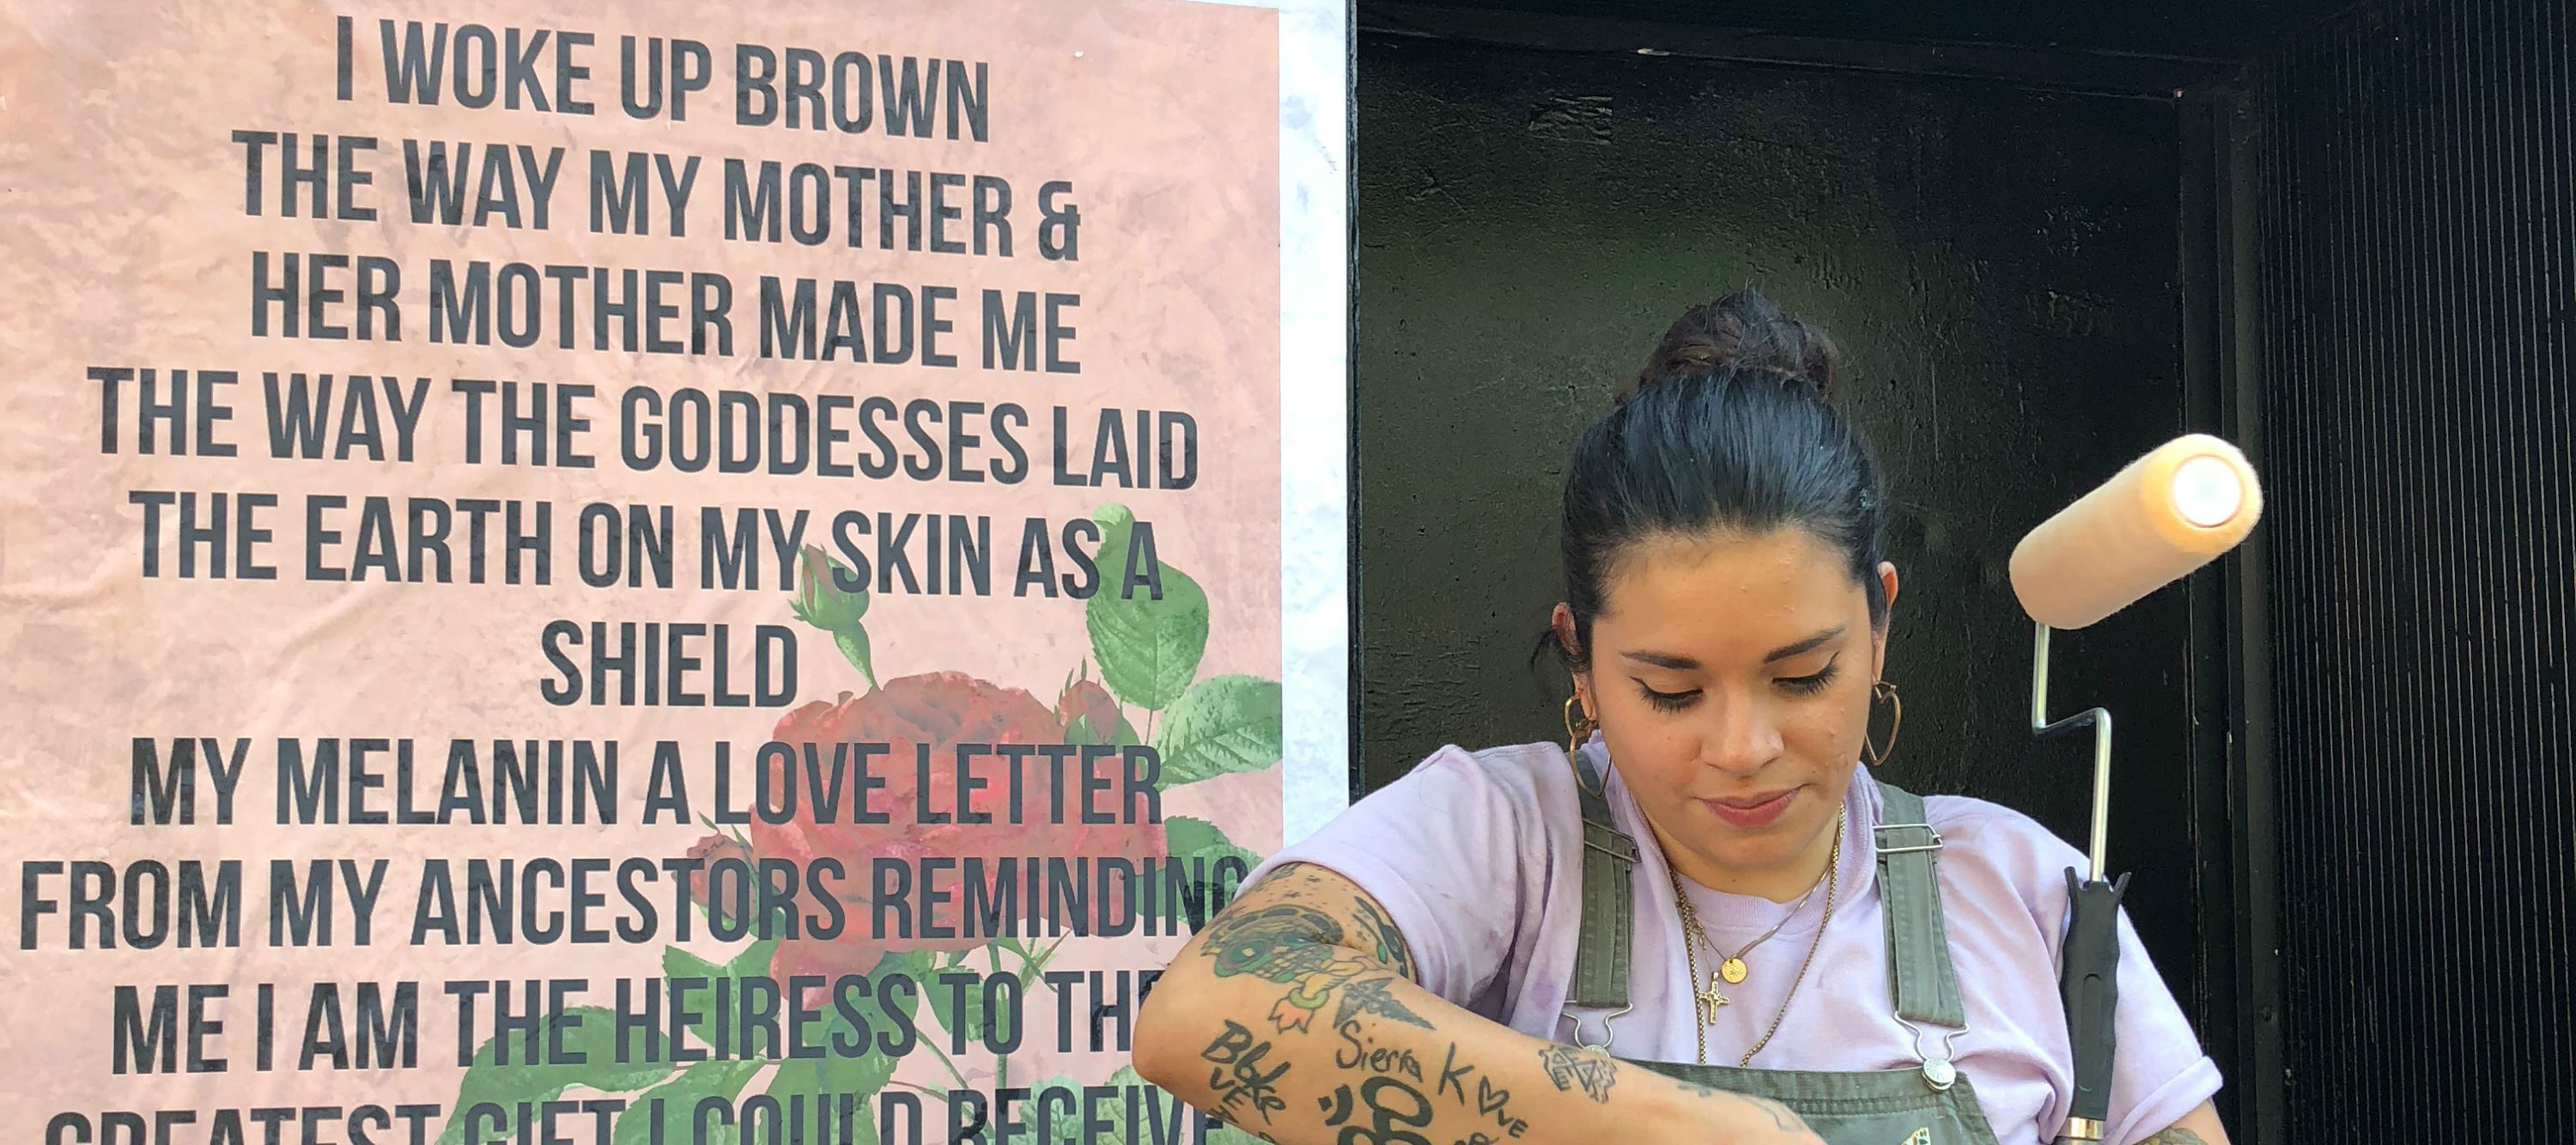 A woman holds a paint roller and looks down, her hands at work; She stands next to a wheat paste mural that features bold black text overlaid on a peach background that features a rose. The text reads: "I woke up Brown/The way my mother 